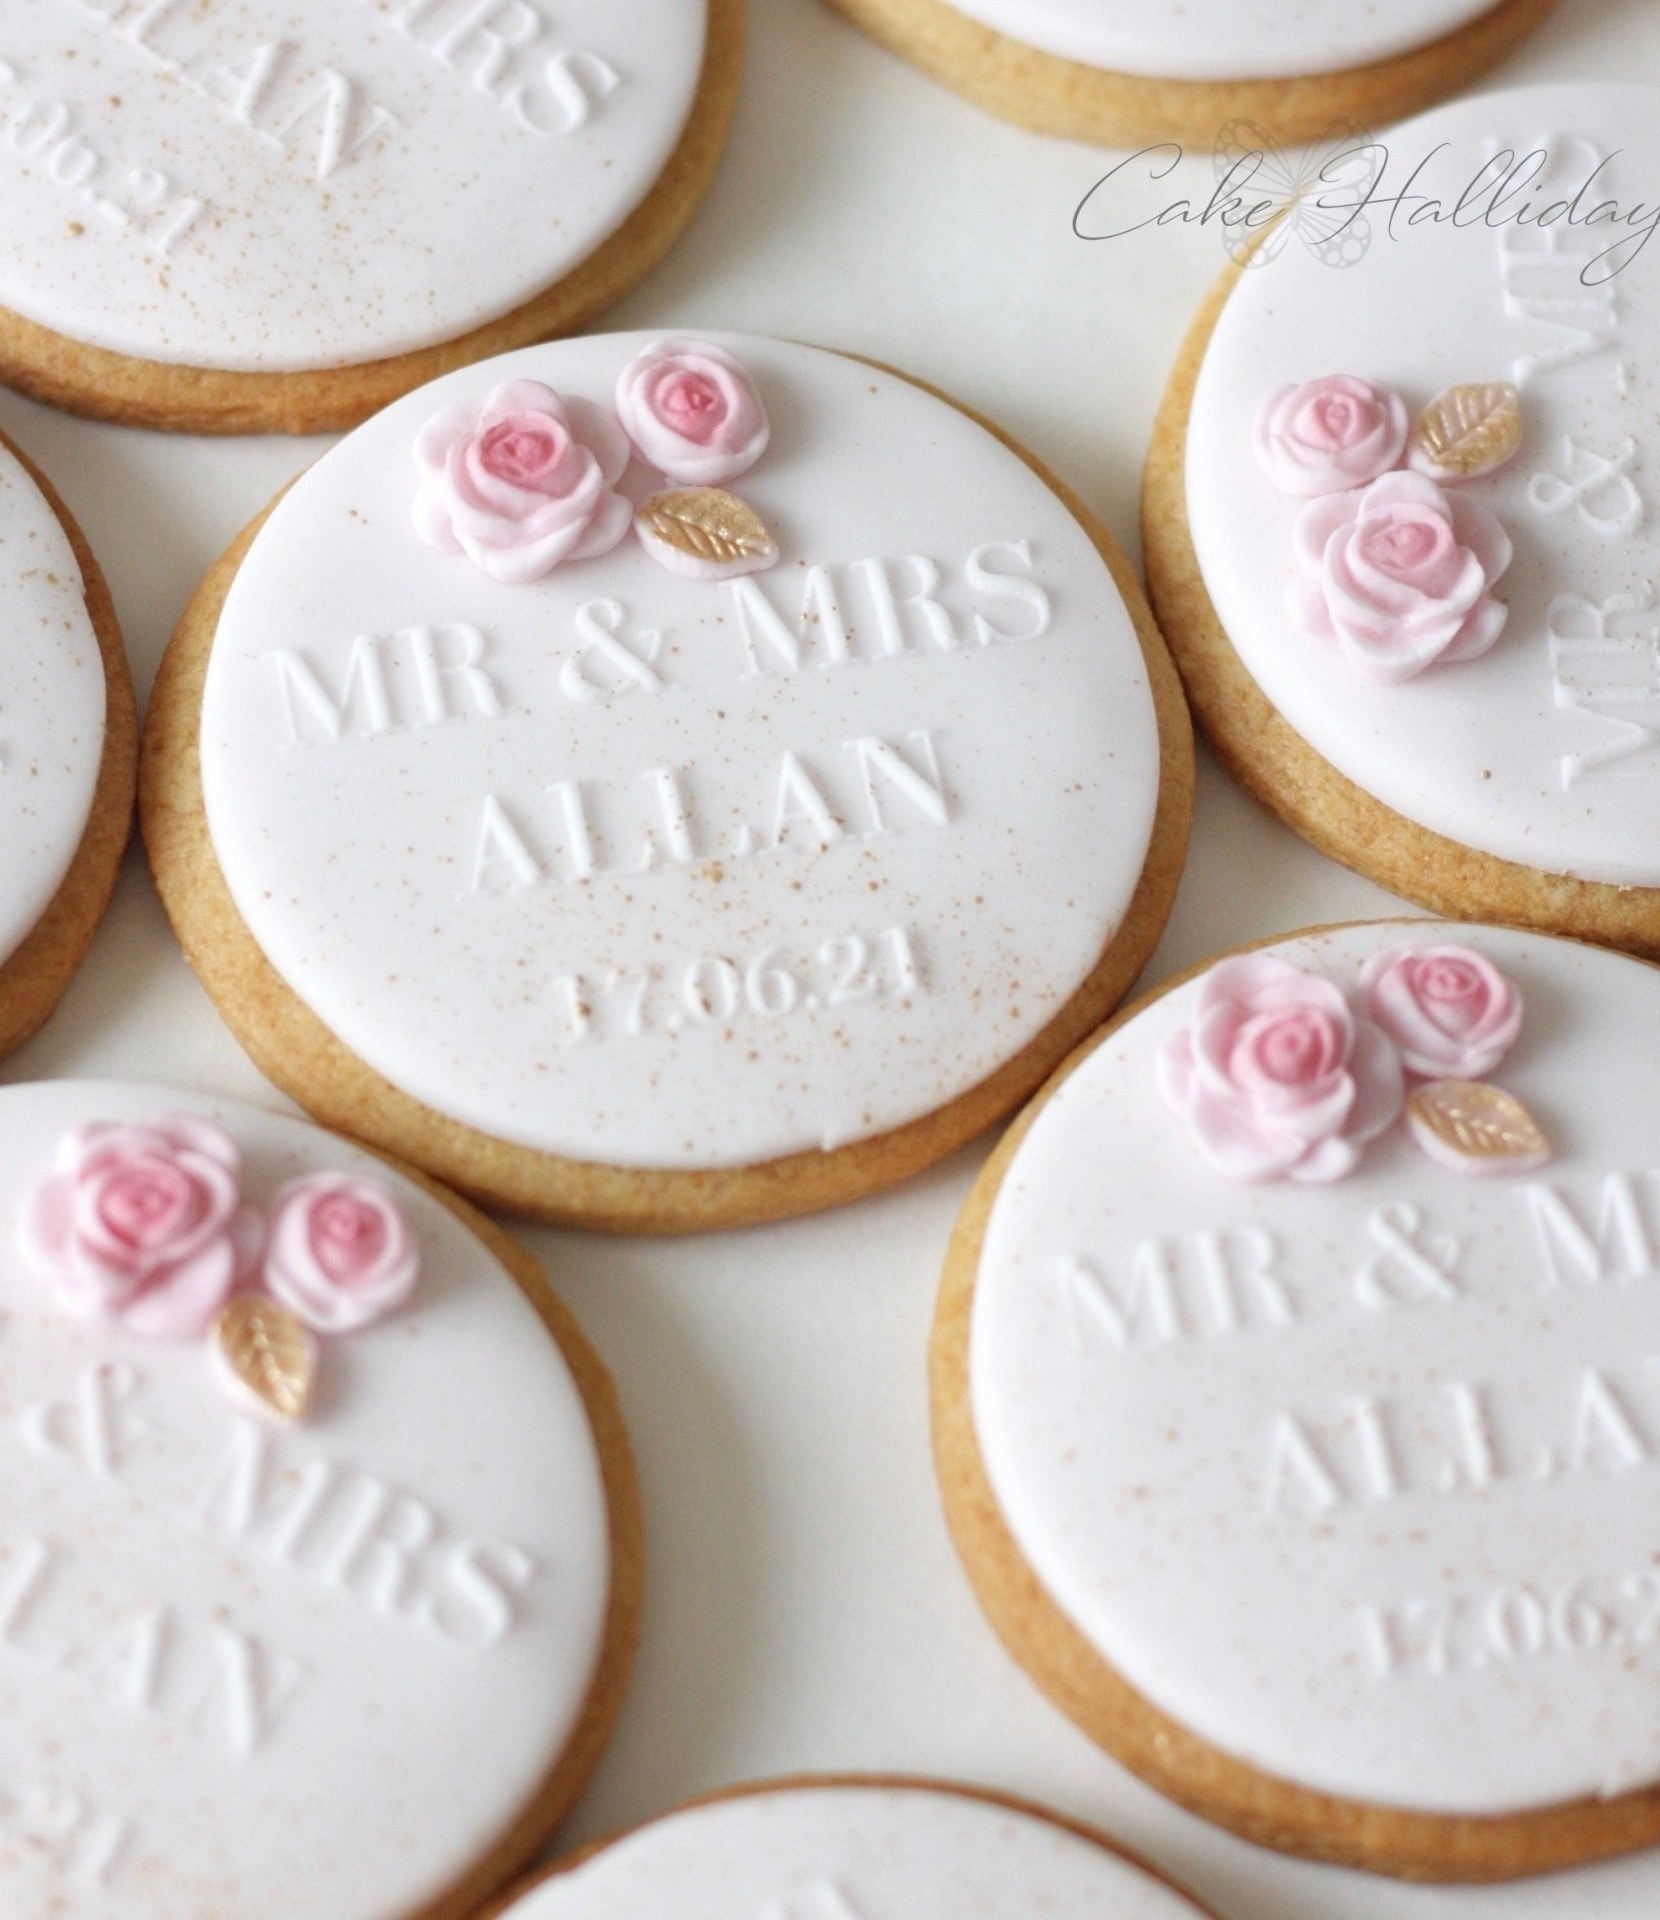 Cookie wedding favours